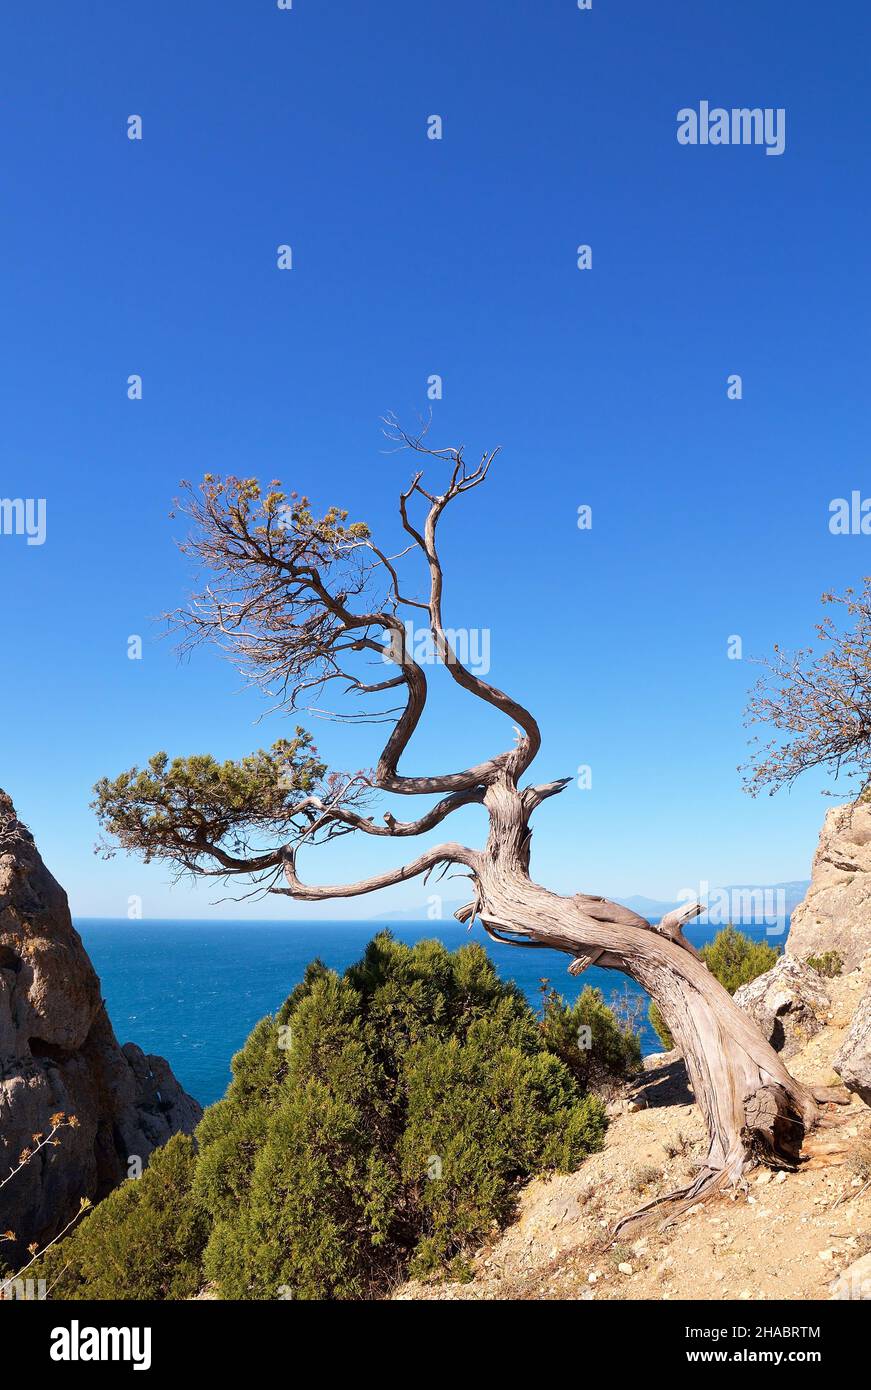 Summer landscape with old dry tree on a rock Stock Photo